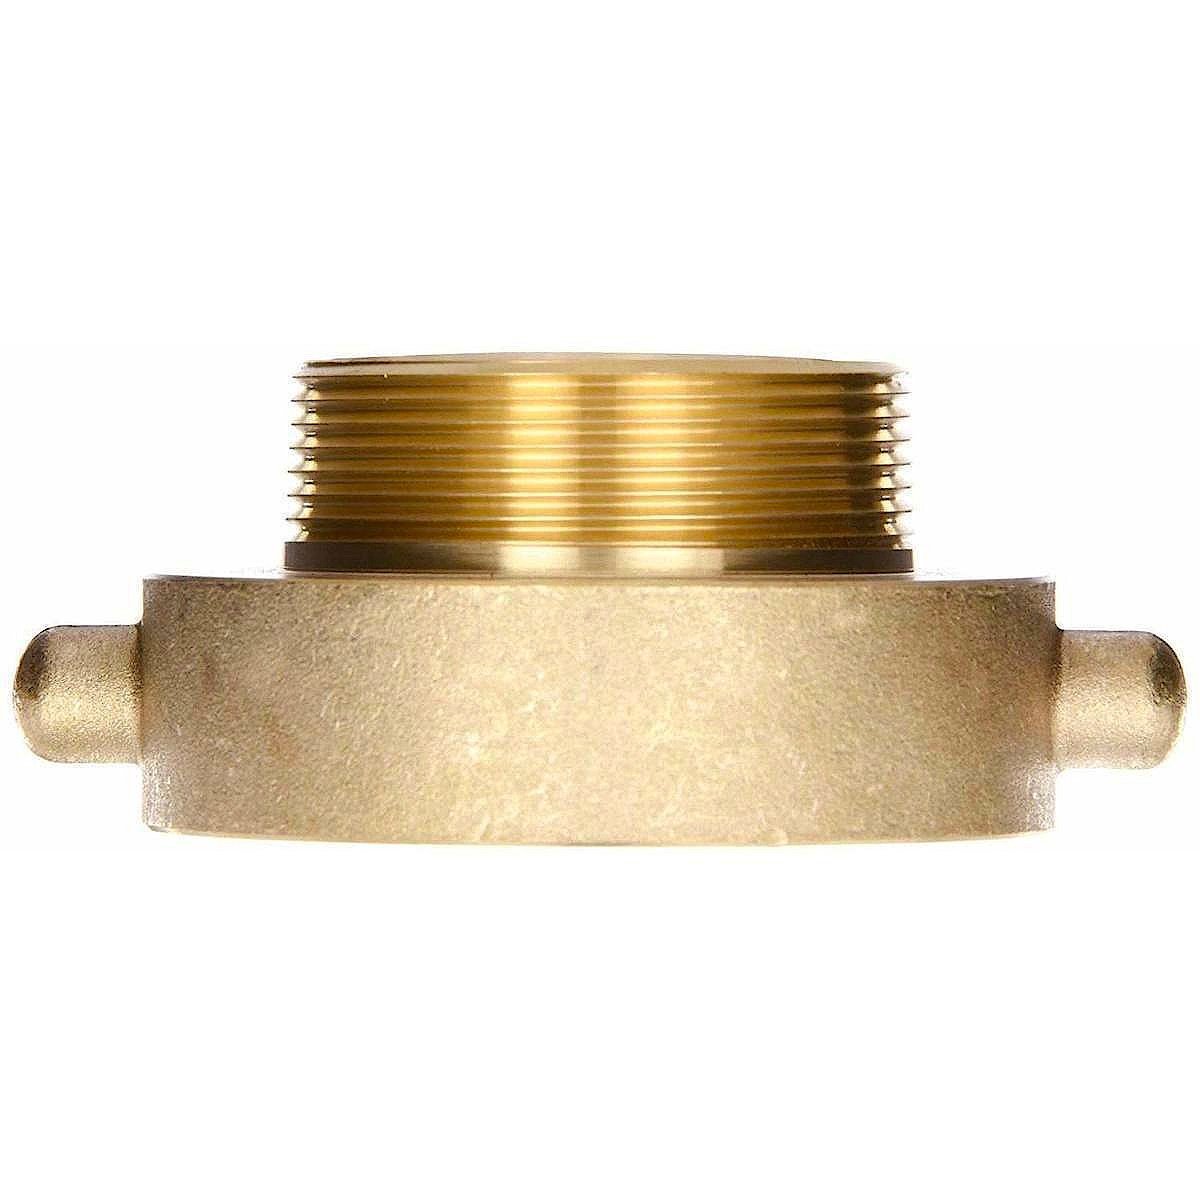 http://www.firehosesupply.com/cdn/shop/products/Female_To_Male_Fire_Hydrant_Adapter_Brass_f33994d2-74bd-4373-9cb2-a9adce306bf6_1200x1200.jpg?v=1590027834